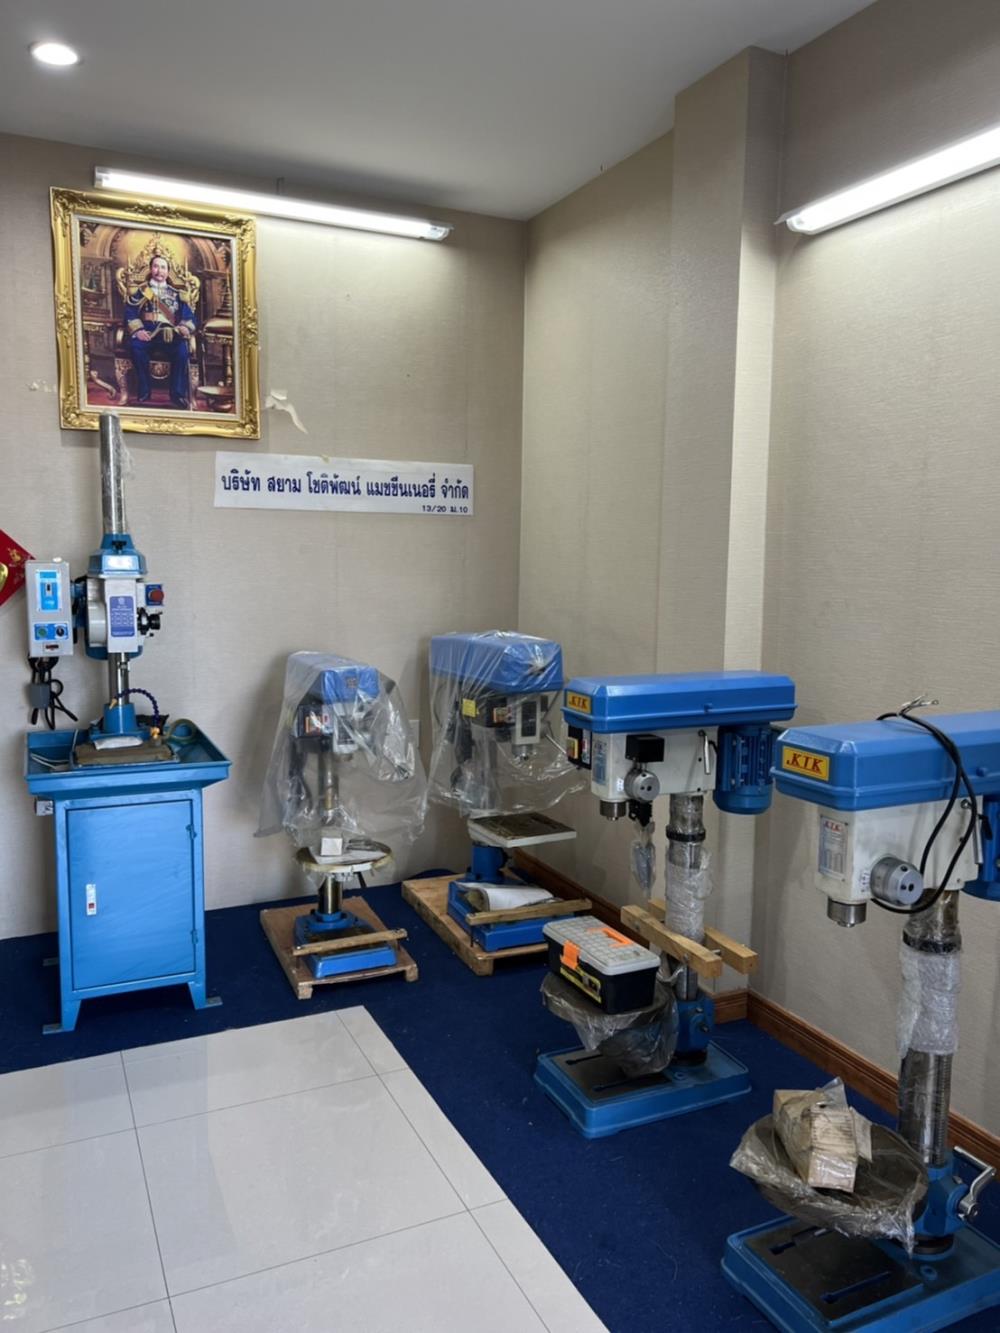 Drilling & Tapping Machine ,Drilling machine & Tapping Machine,Drilling machine & Tapping Machine,Machinery and Process Equipment/Maintenance and Support